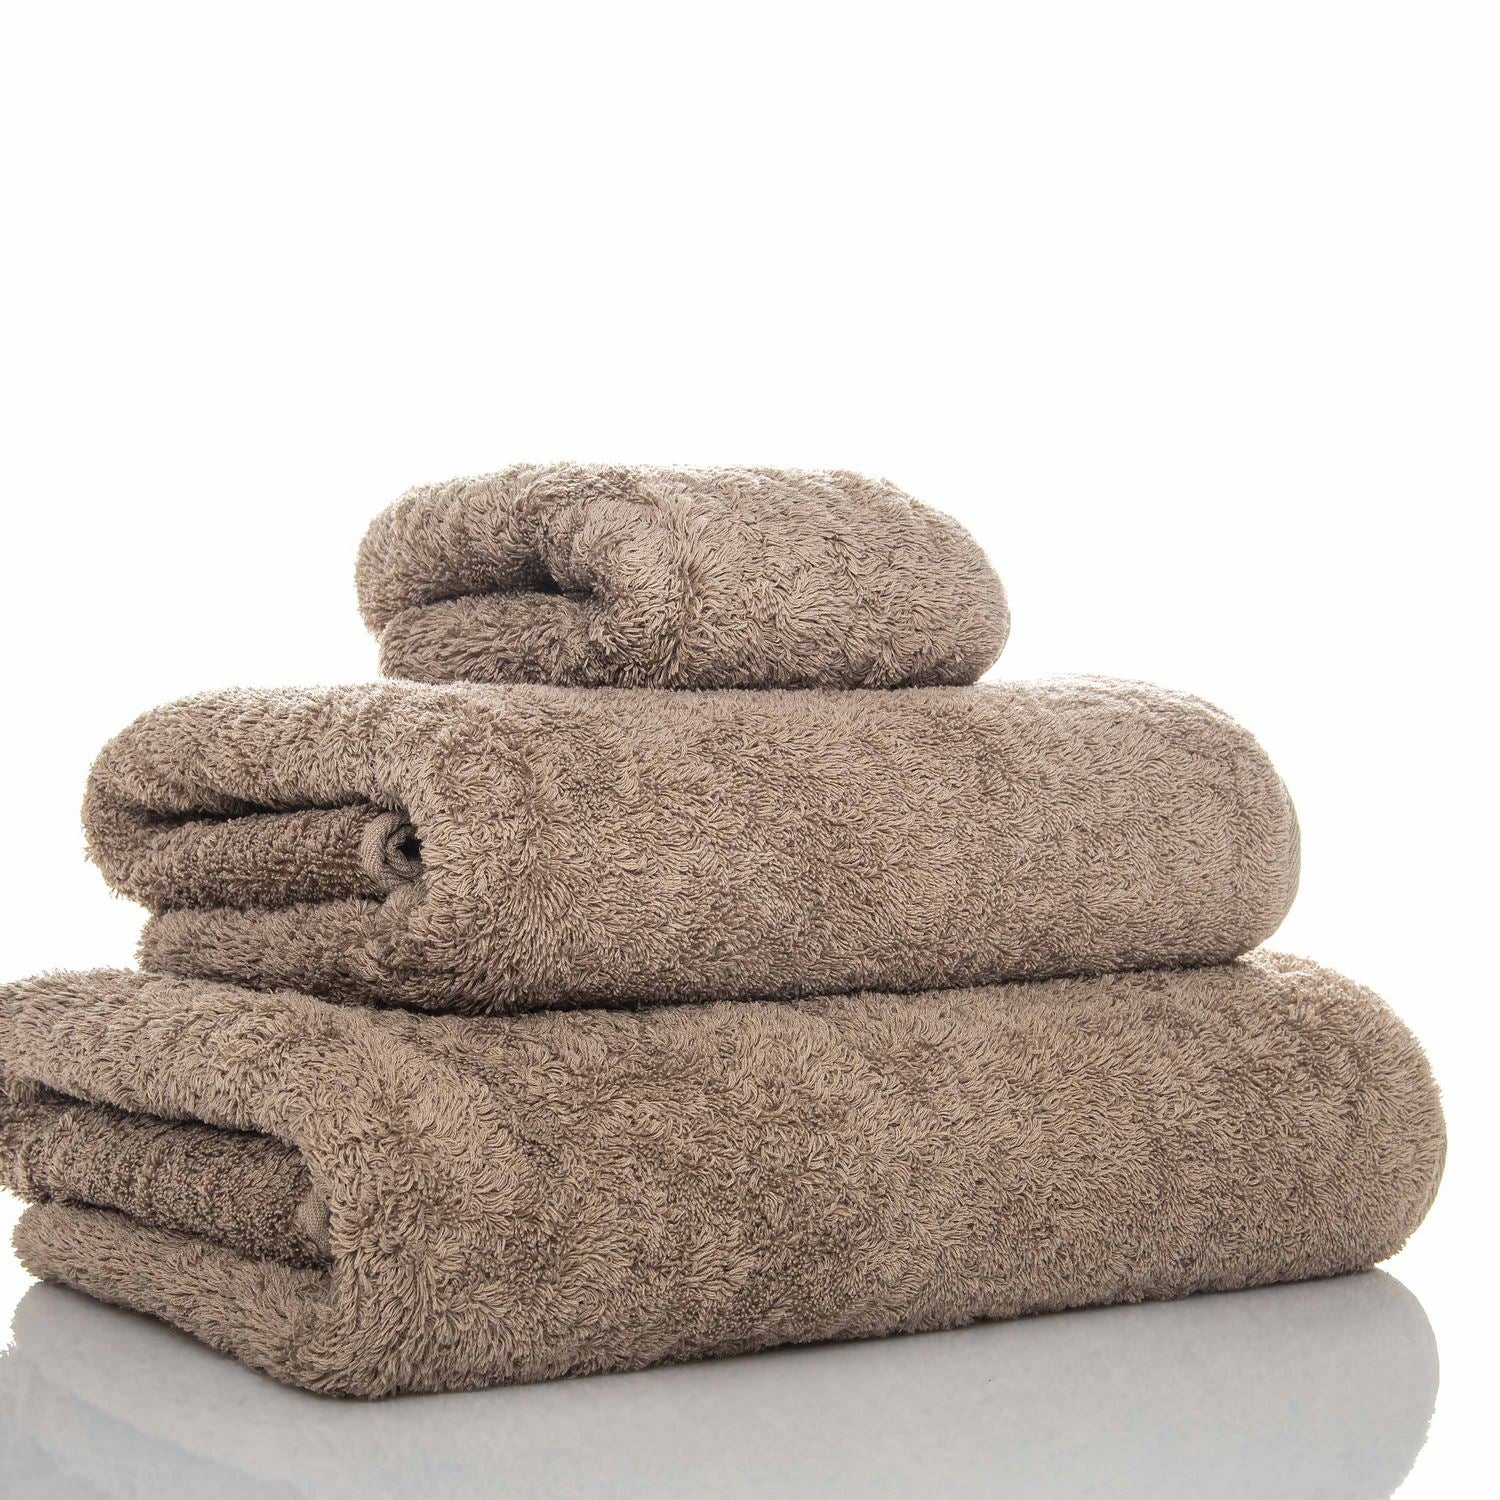 Graccioza Egoist Face Towels - Luxurious Beds and Linens